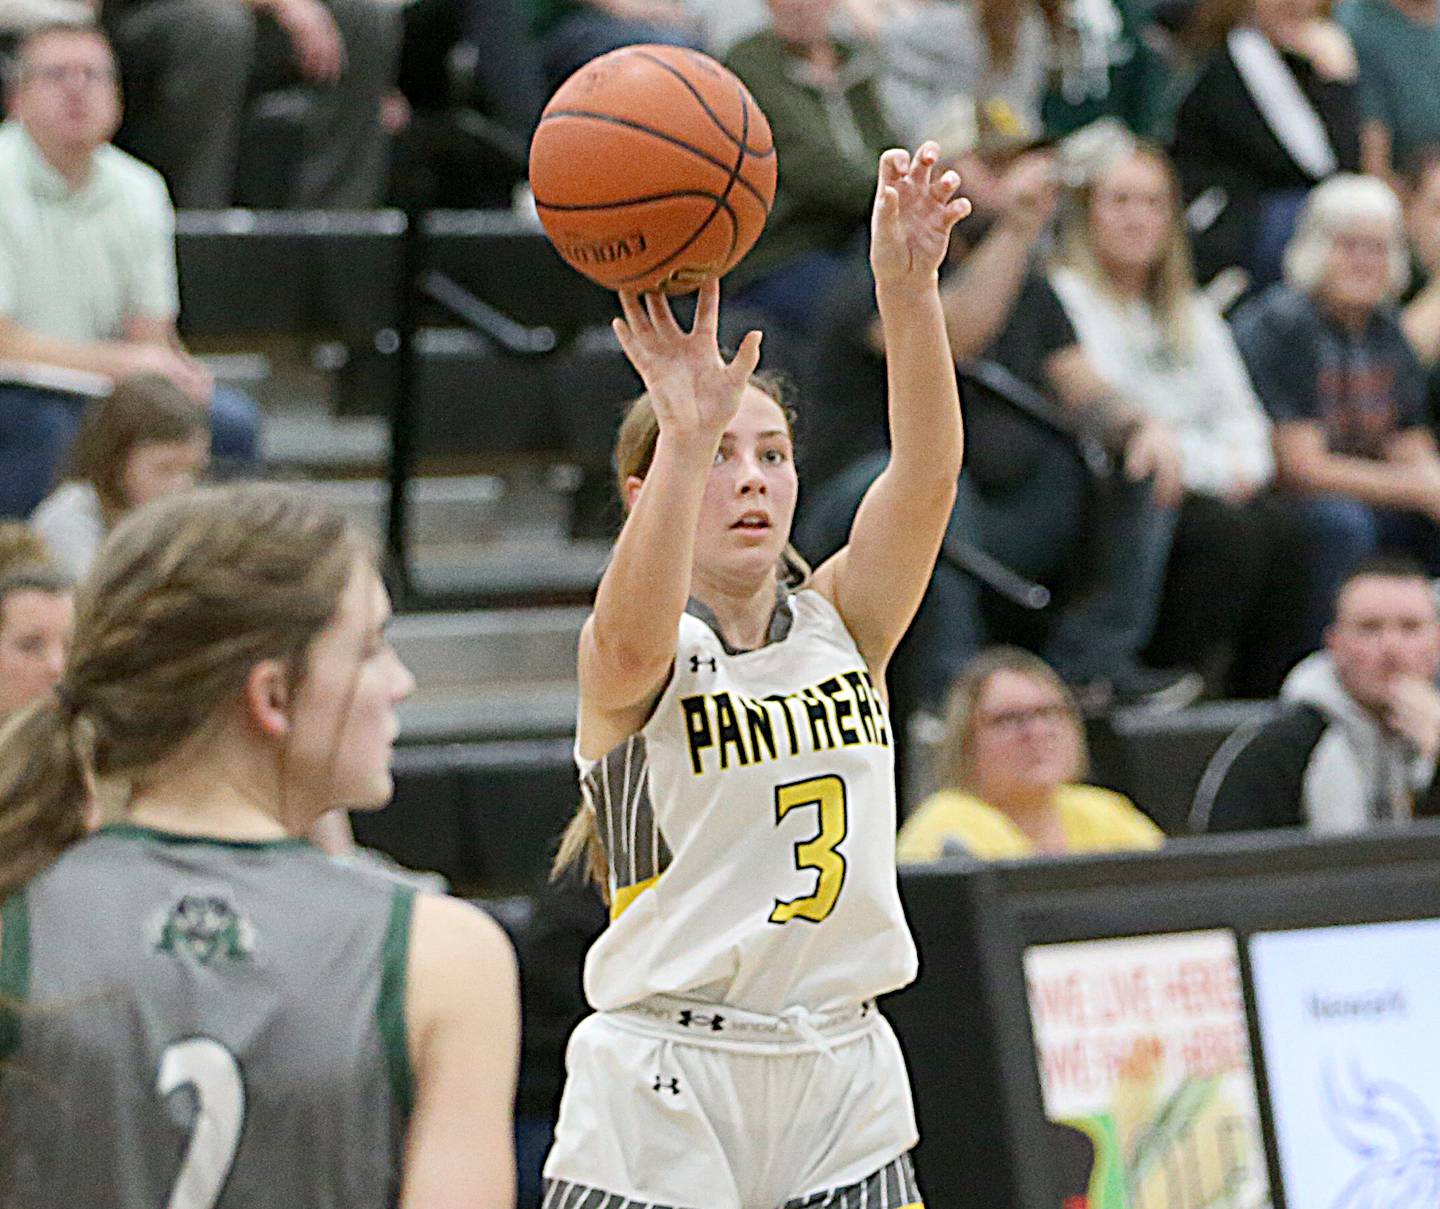 Putnam County's Gabby Doyle shoots a wide-open shot over Midland's Jordyn Pyles during the Class 1A Regional game on Monday, Feb. 13, 2023 at Putnam County High School.